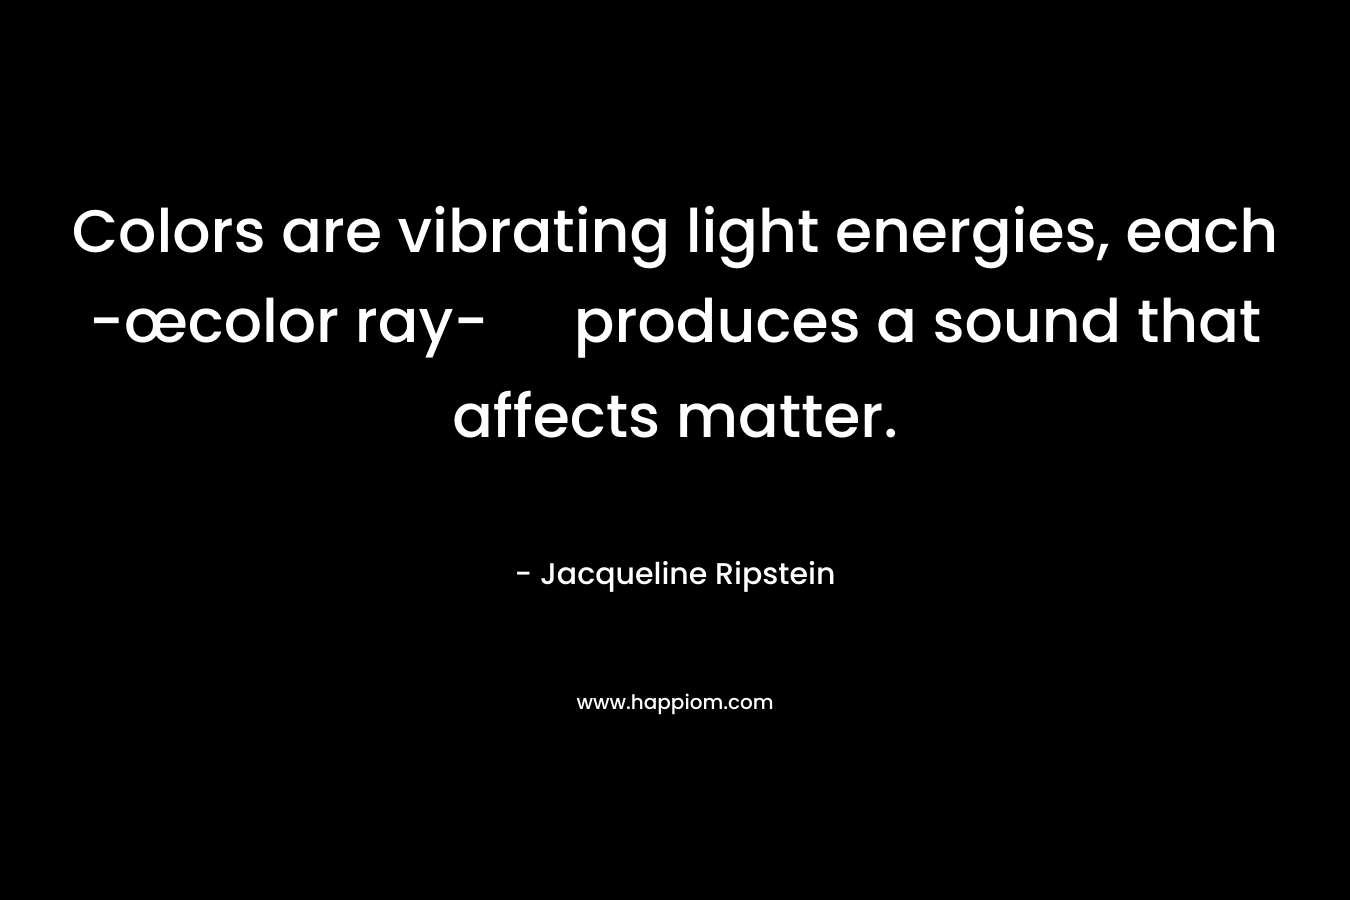 Colors are vibrating light energies, each -œcolor ray- produces a sound that affects matter. – Jacqueline Ripstein